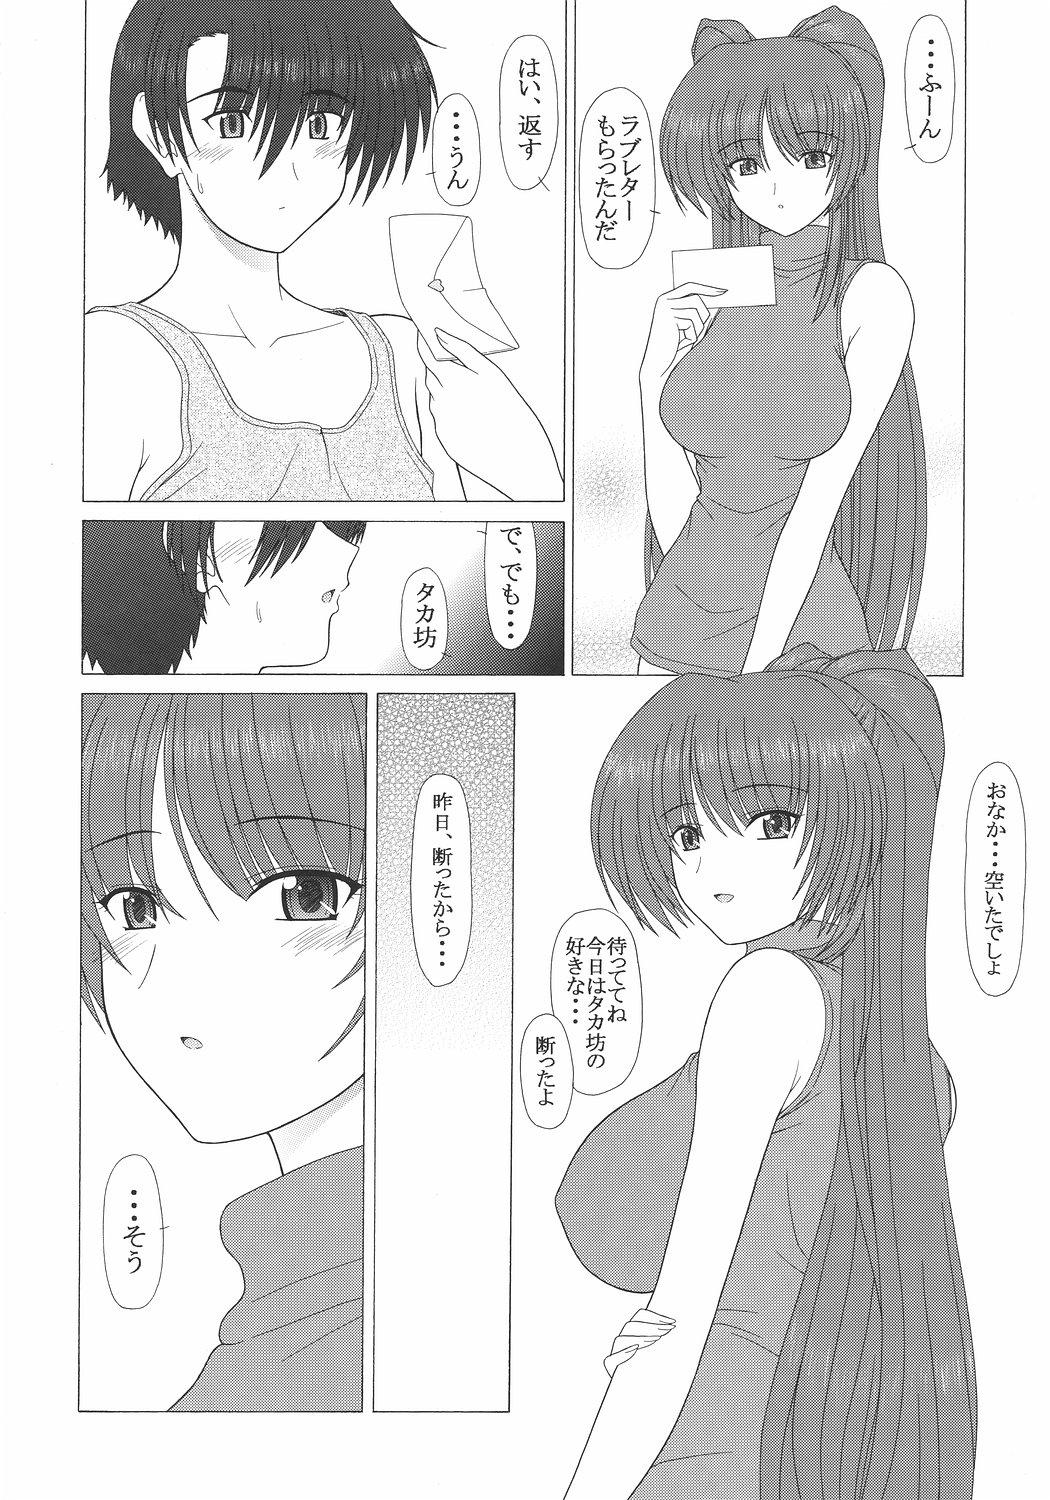 Smooth PURE NEXT GENERATION Vol. 7 Tama-nee to Love Love - Toheart2 Jerking - Page 7